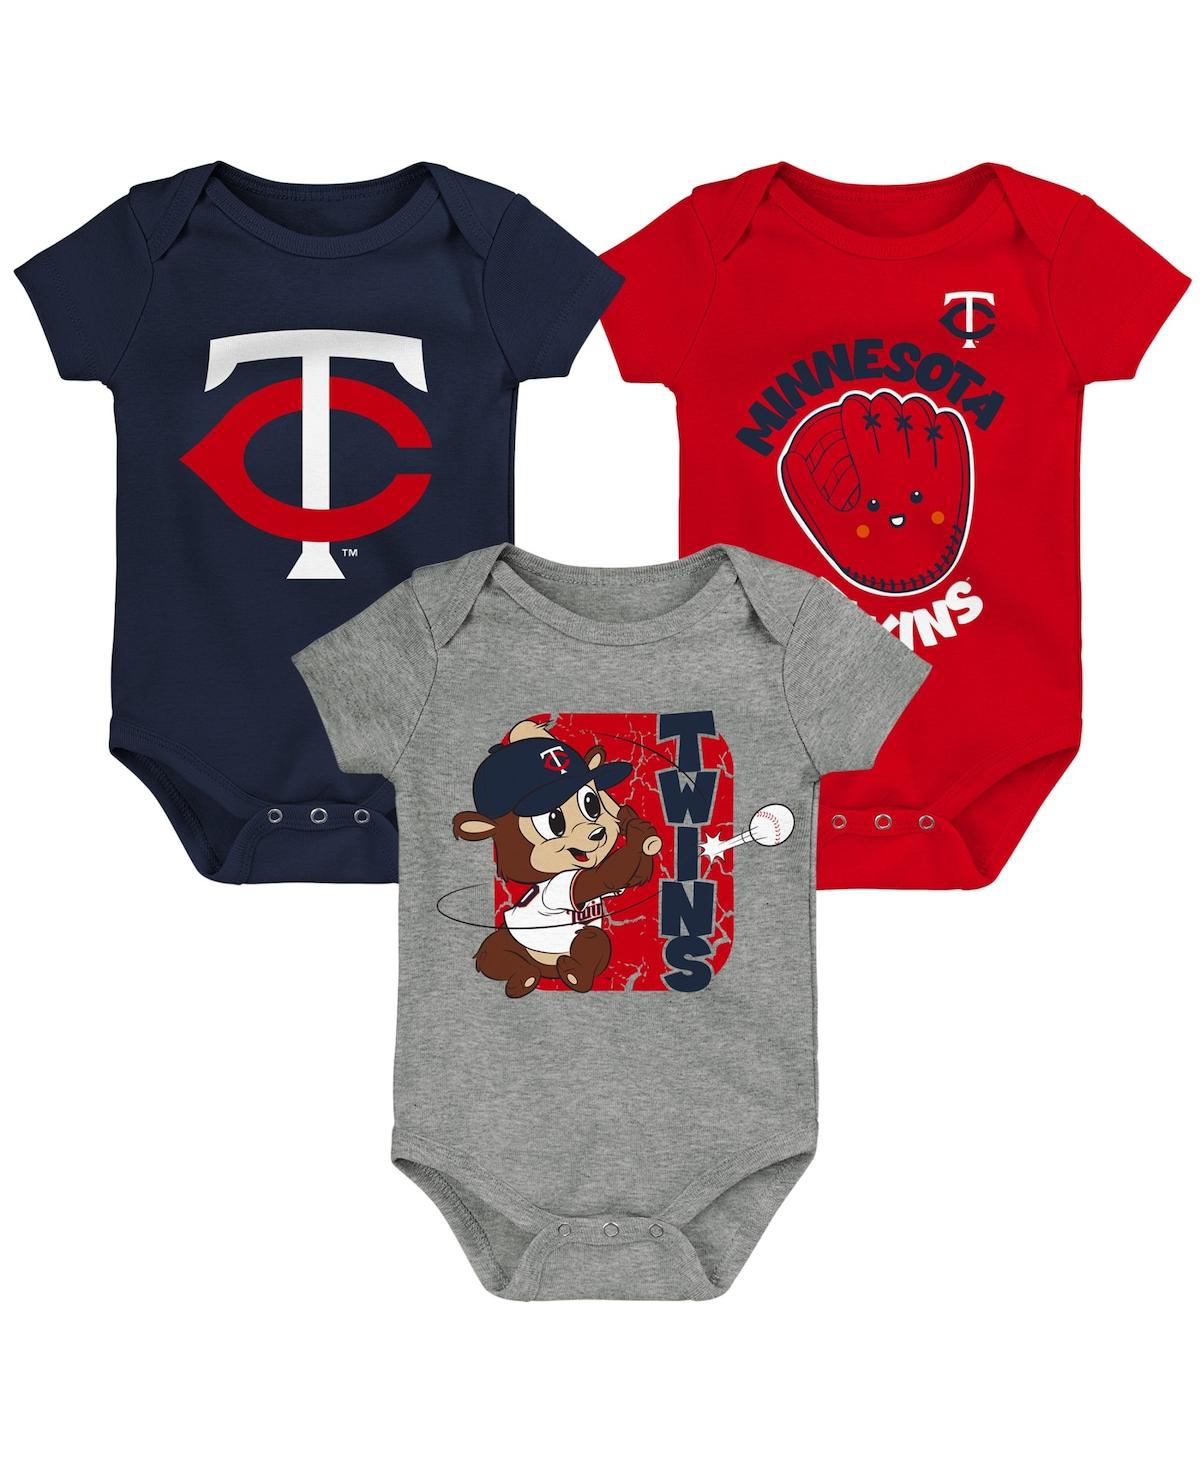 Outerstuff Babies' Unisex Newborn Infant Navy And Red And Gray Minnesota Twins Change Up 3-pack Bodysuit Set In Navy,red,gray